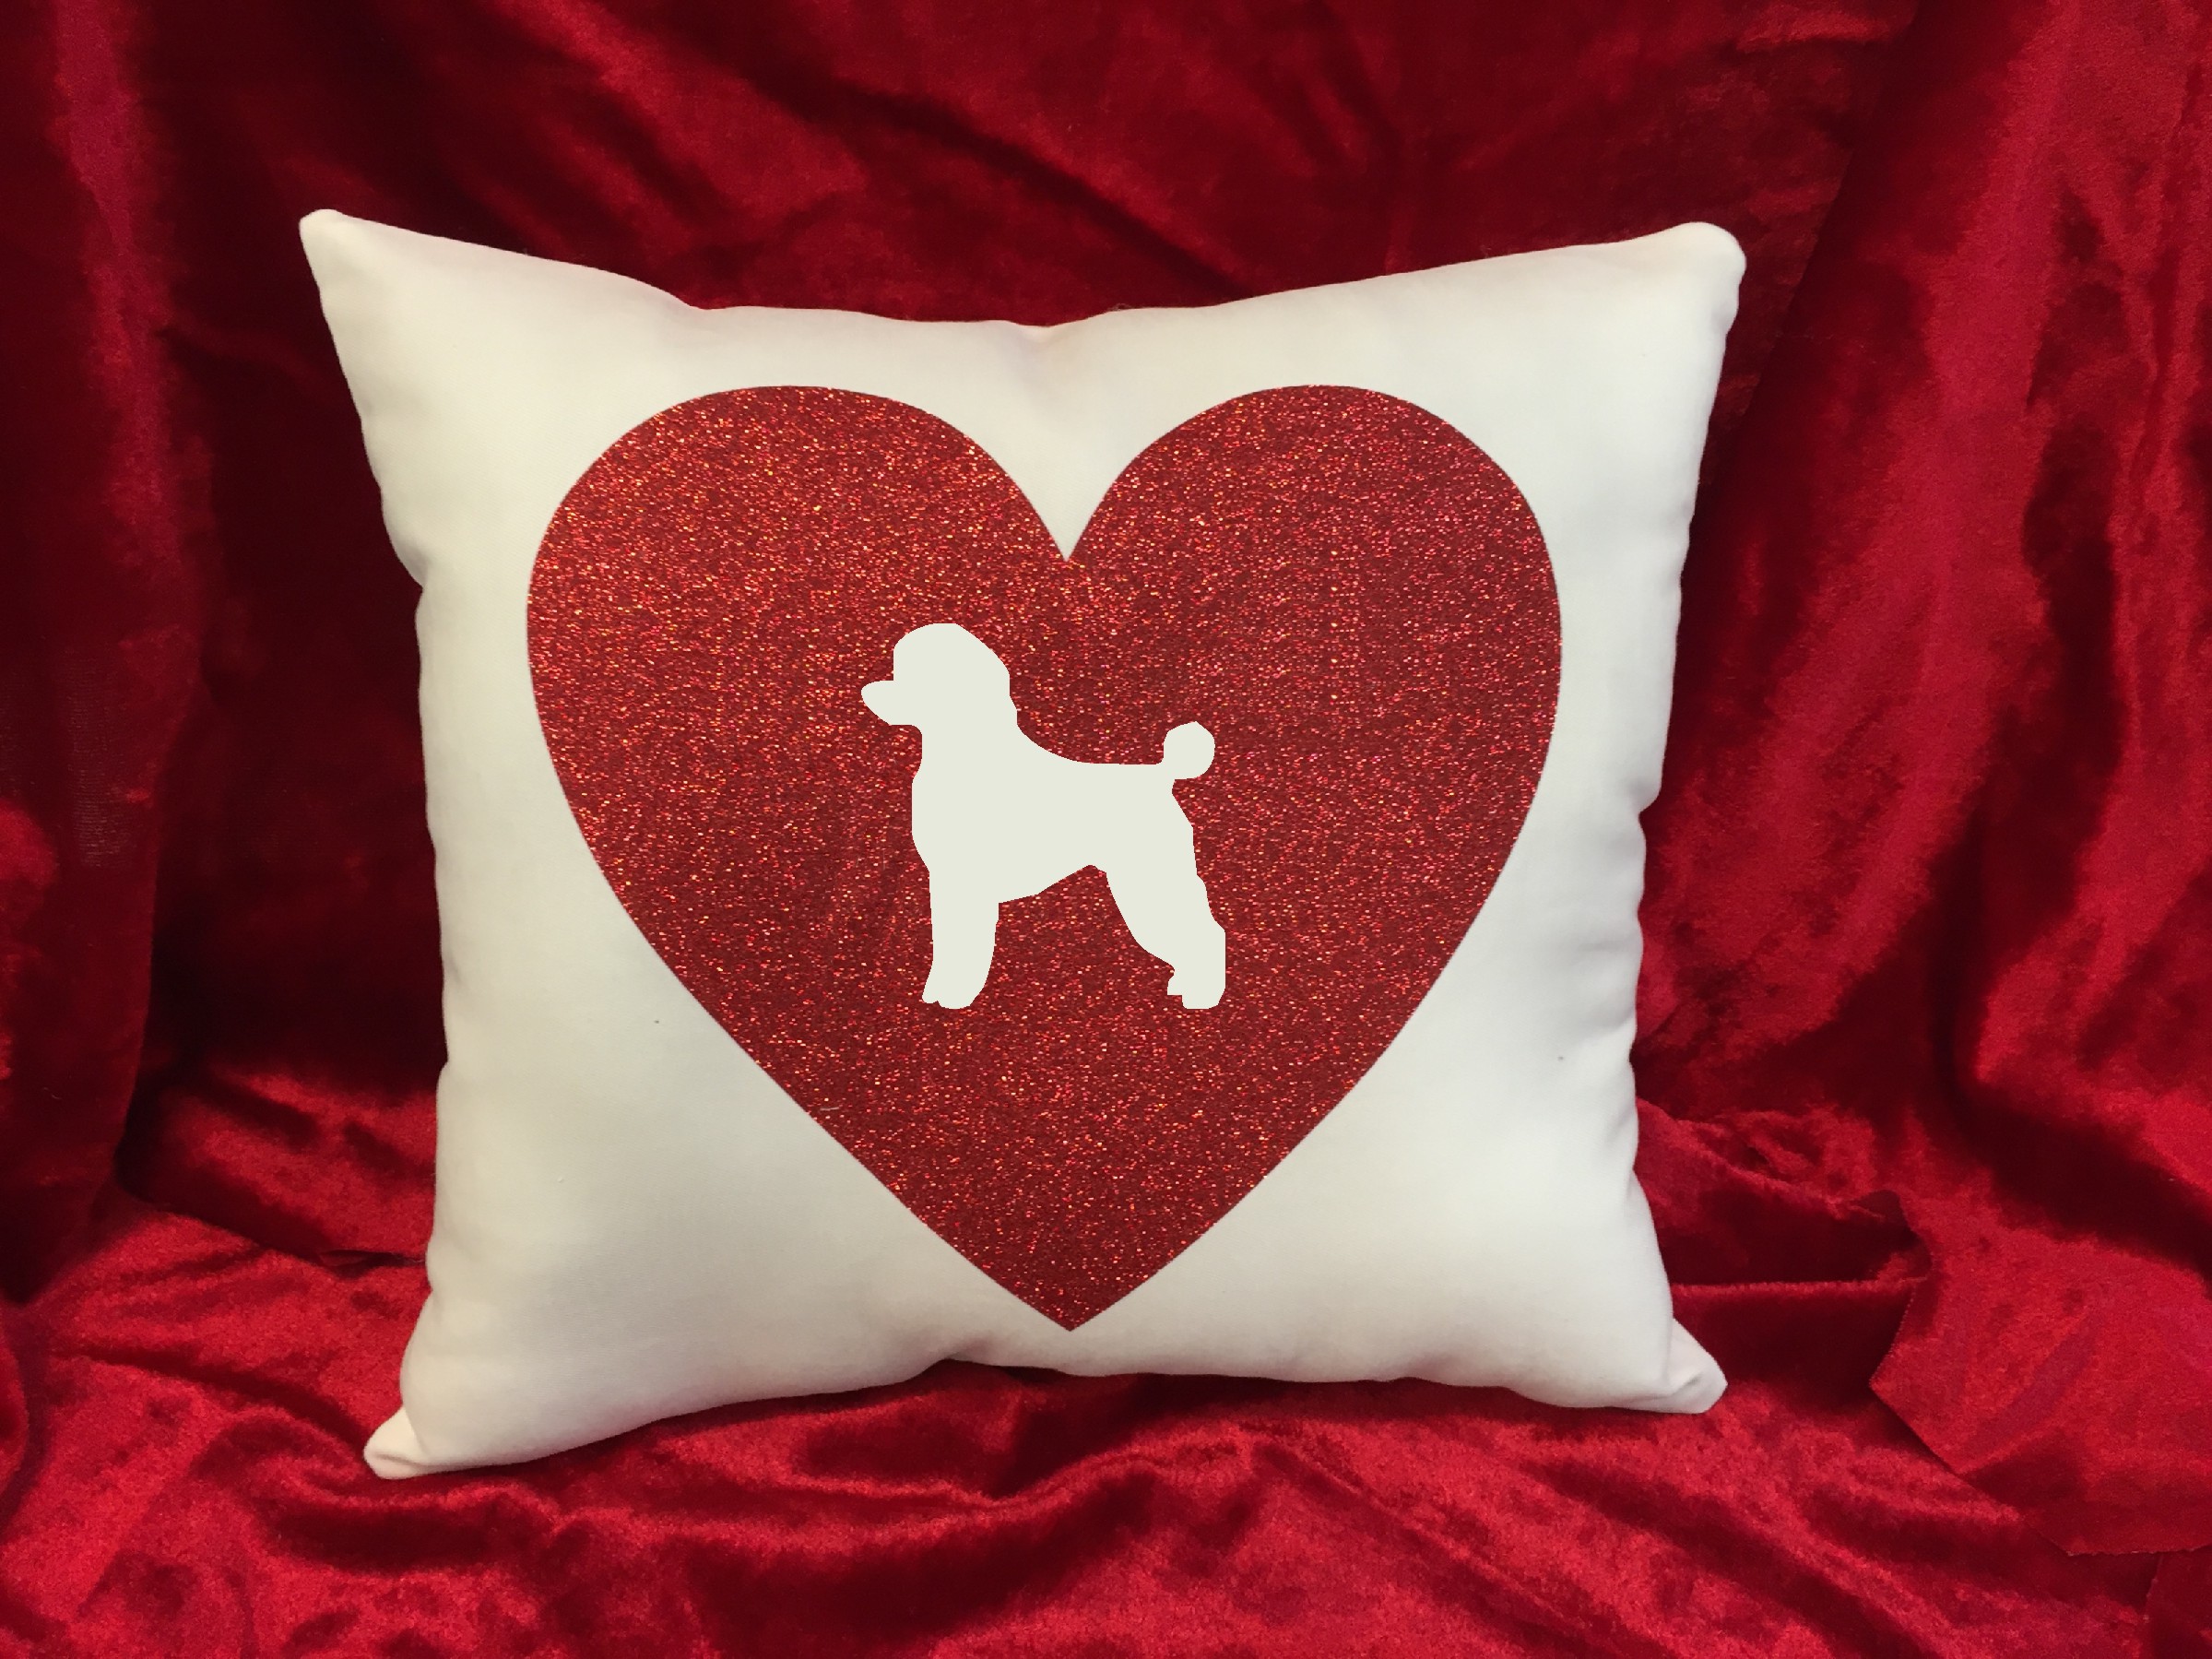 Dogs - Throw Pillow - Miniature Poodle